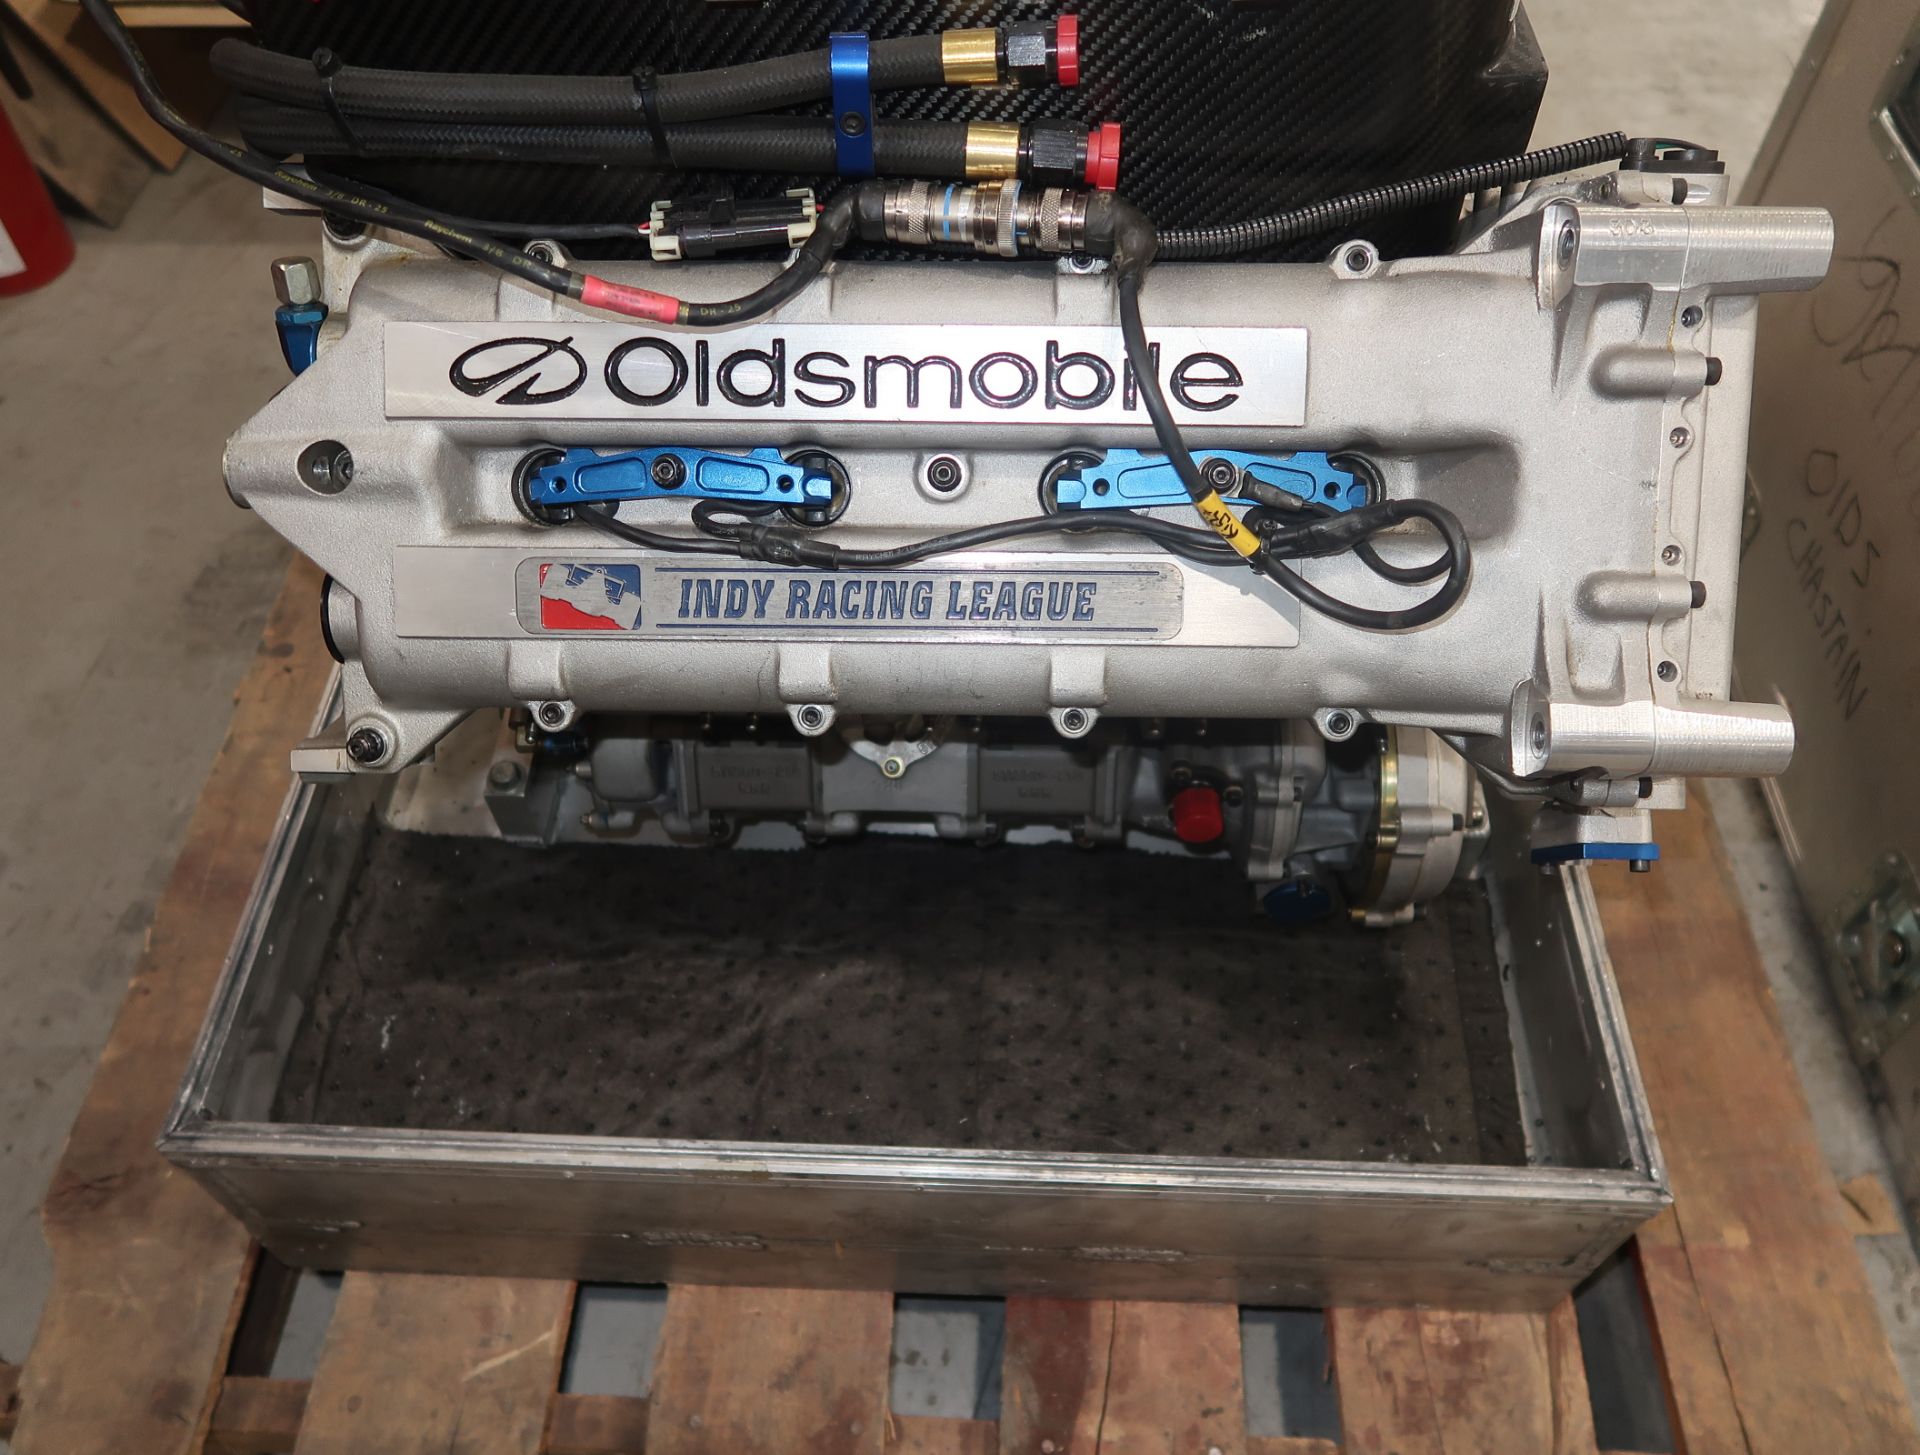 OLDSMOBILE 4.0 INDY RACING LEAGUE ENGINE (BUILT BY SPEEDWAY ENGINE DEVEOLPMENT) SAYS 354 MI. @ - Image 5 of 10